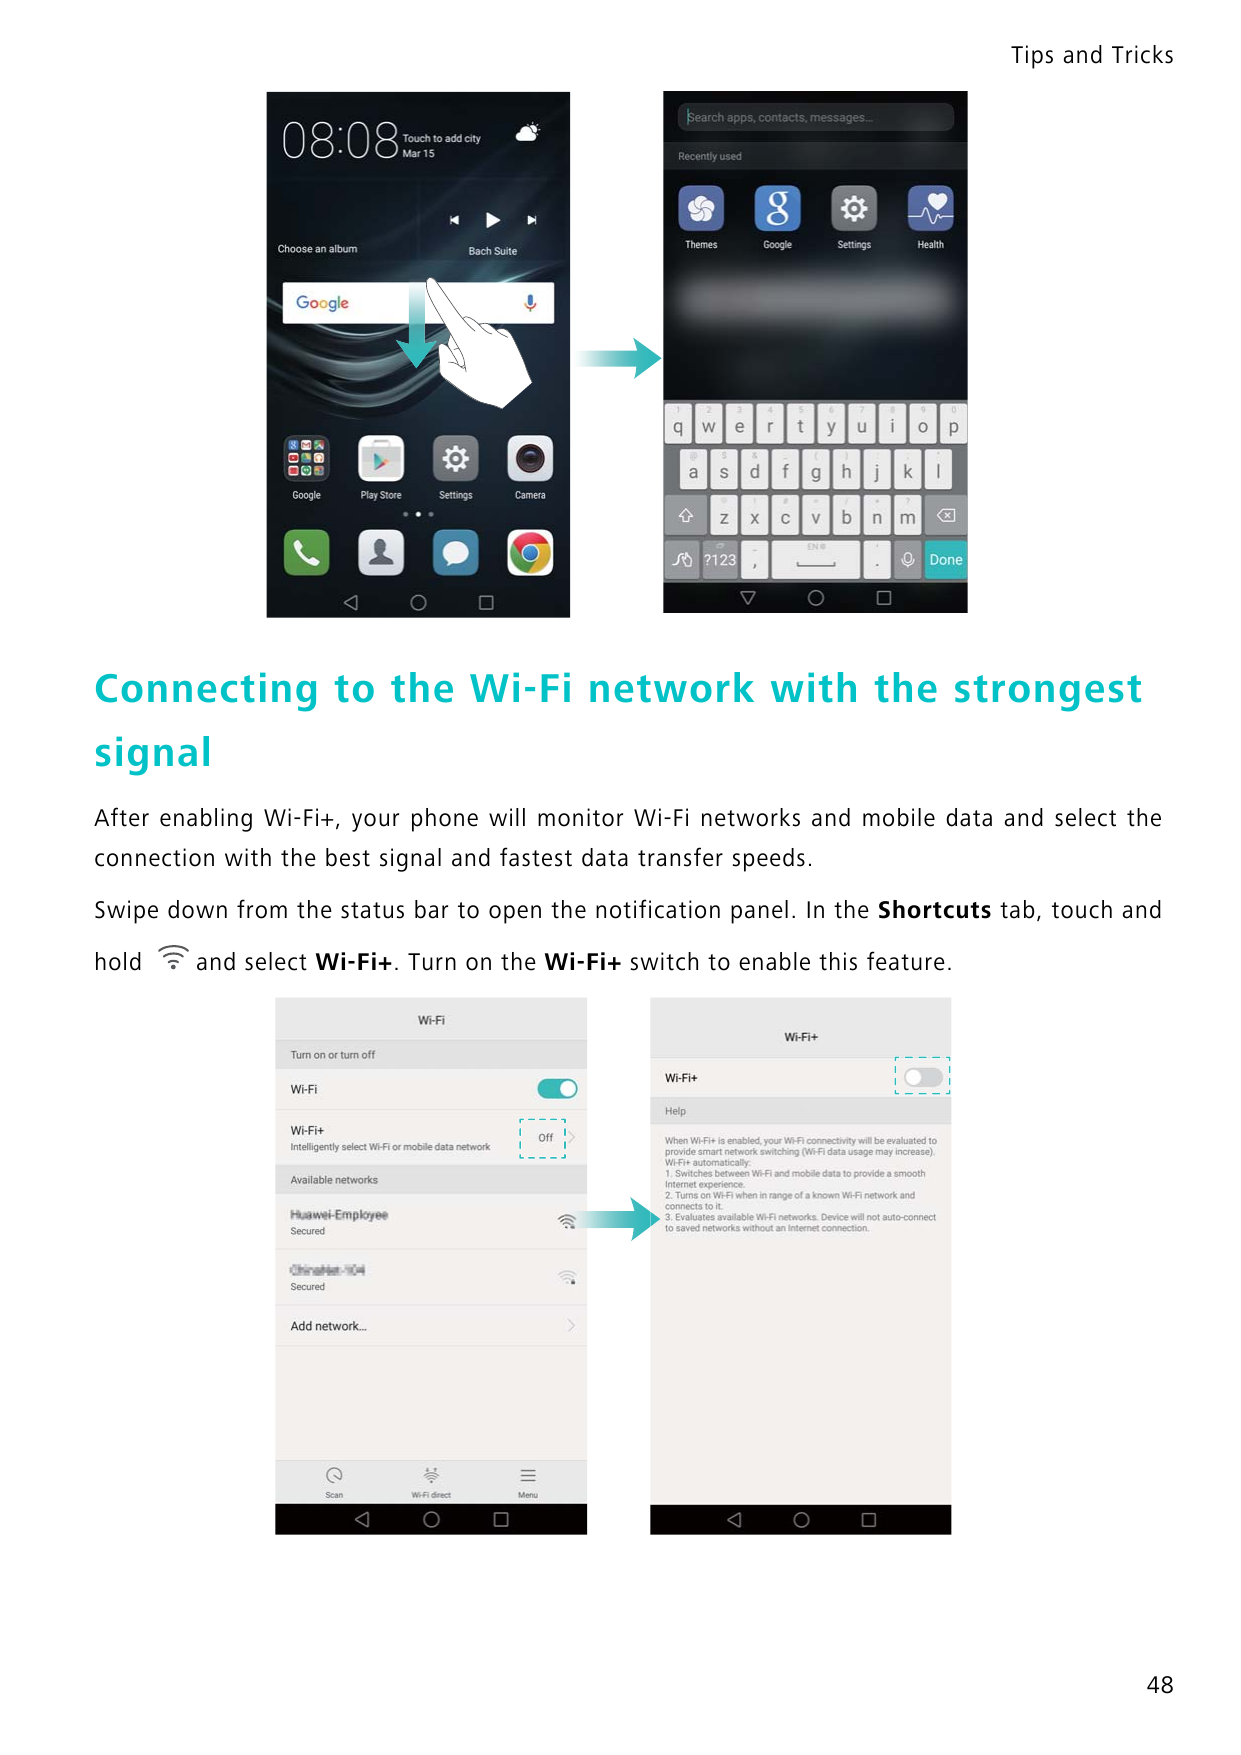 Tips and TricksConnecting to the Wi-Fi network with the strongestsignalAfter enabling Wi-Fi+, your phone will monitor Wi-Fi netw